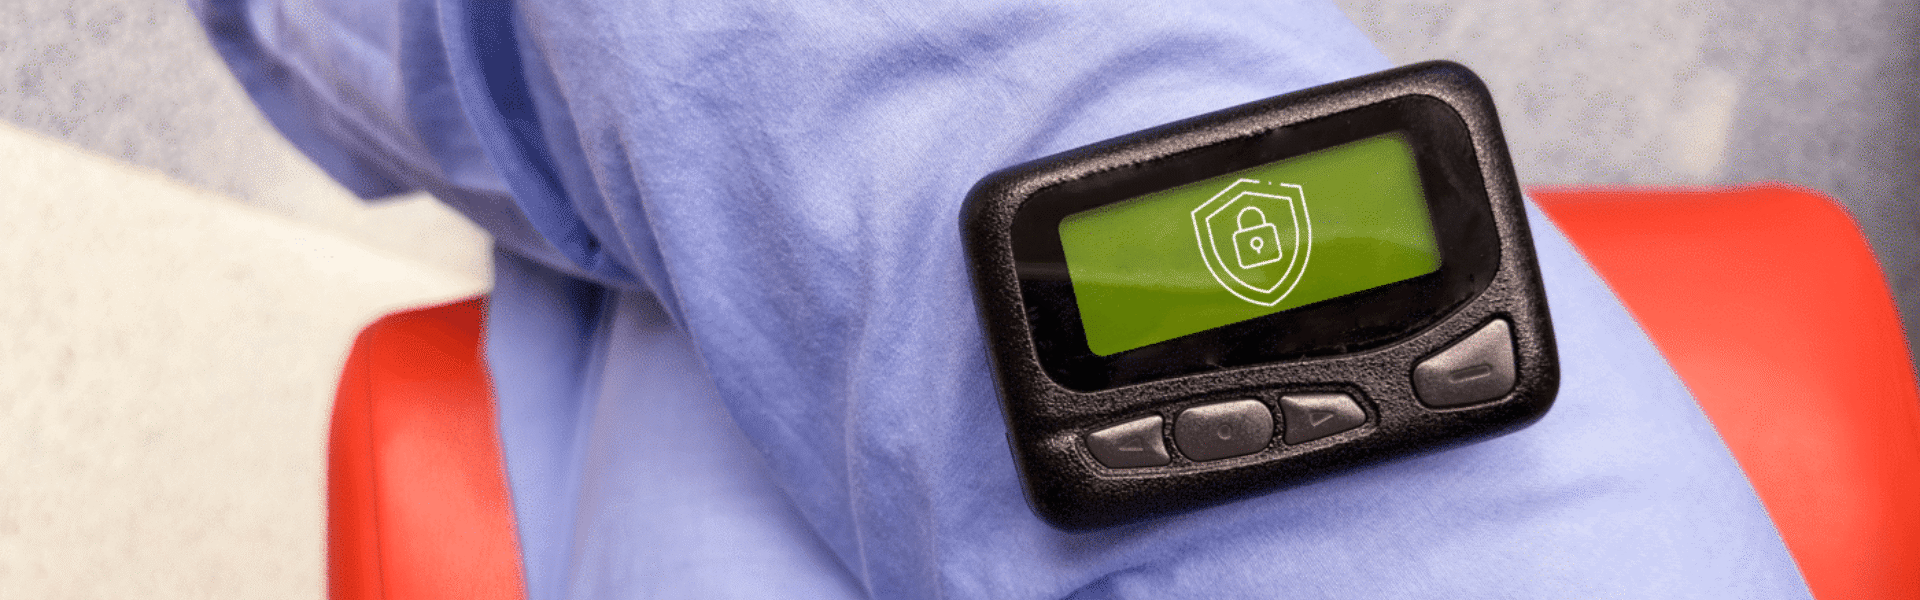 Secure pager on lap